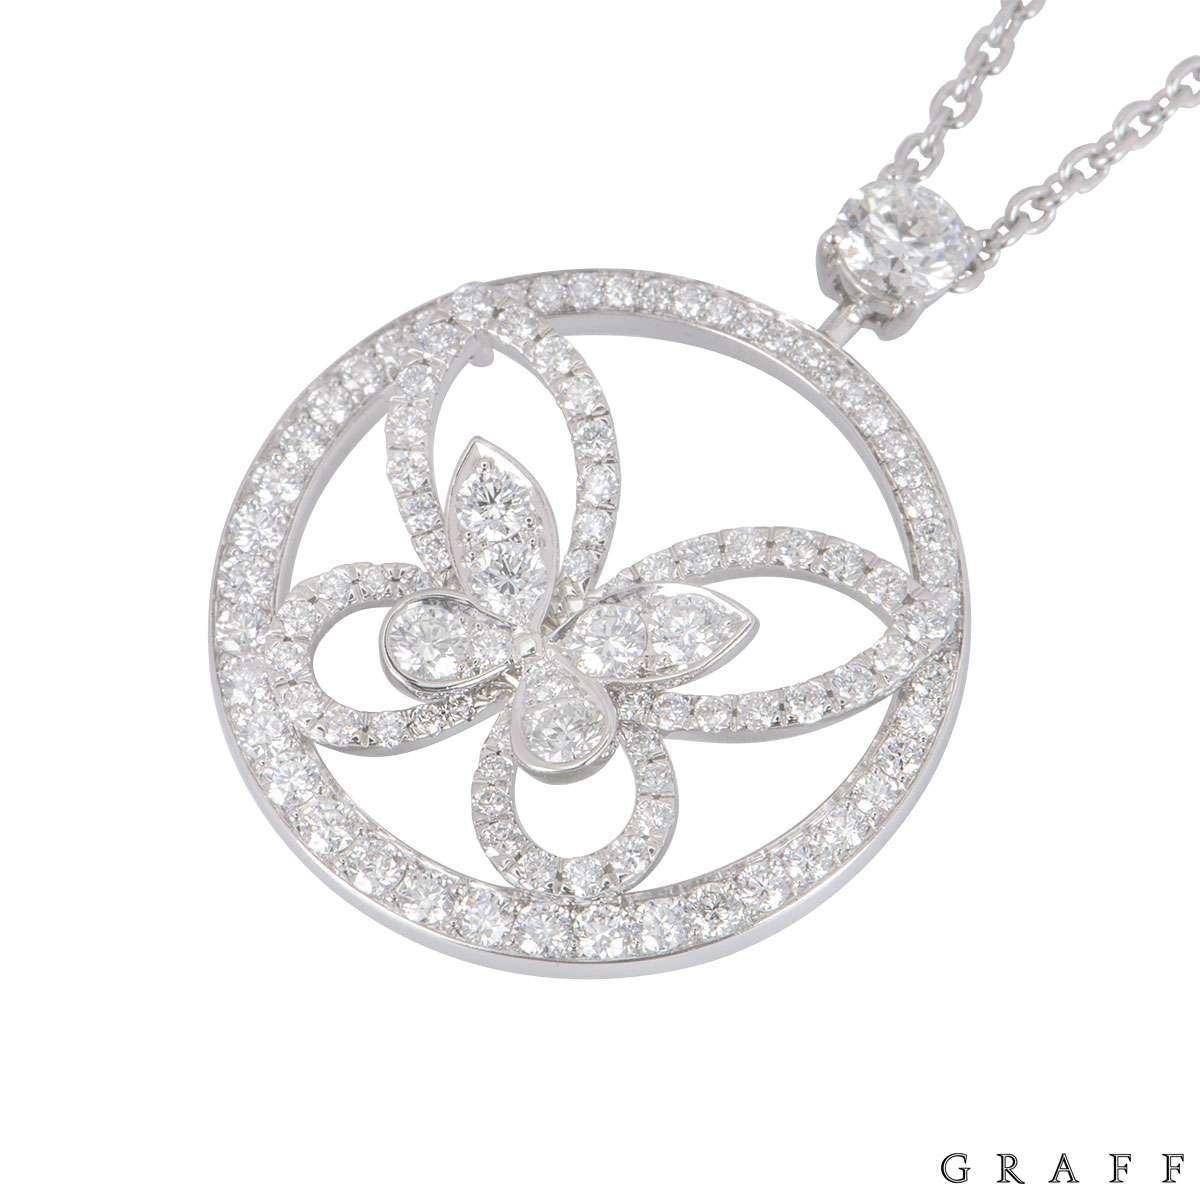 An 18k white gold diamond Butterfly pendant by Graff from the Butterfly collection. The Butterfly pendant is in an openwork design set with 107 round brilliant cut diamonds with a total weight of 1.36ct. The necklace measures 16 inches in length and